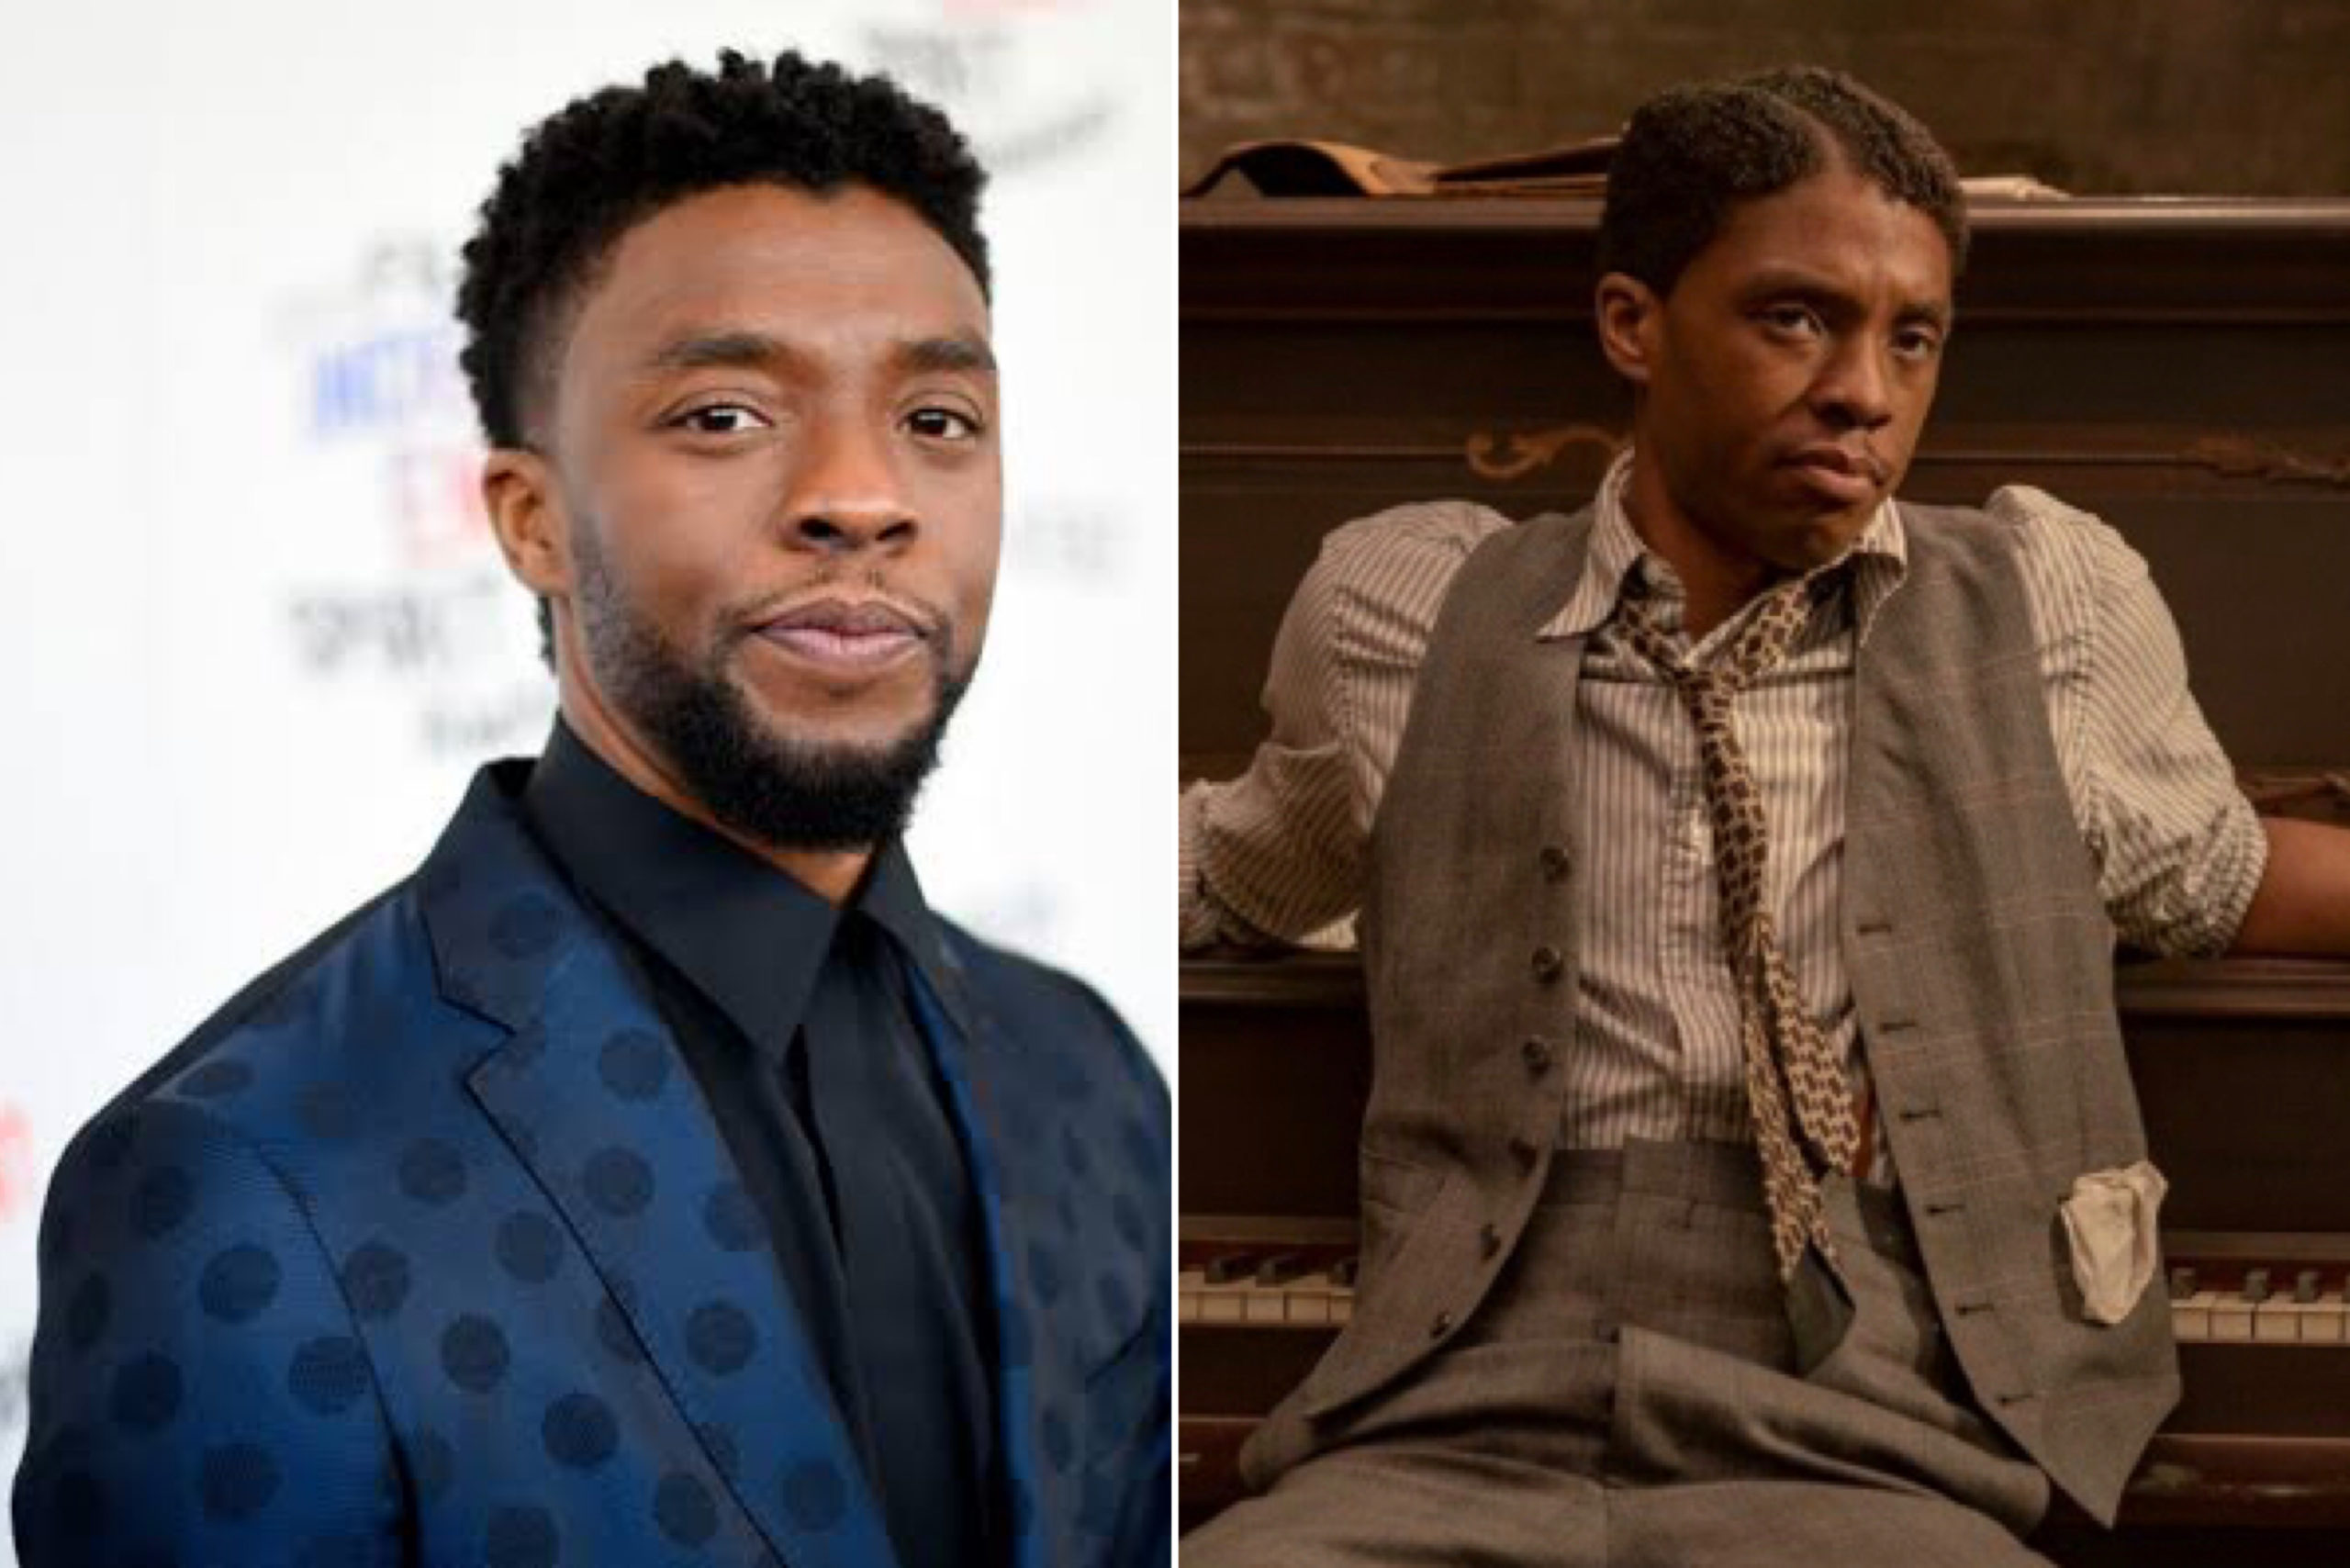 Chadwick Boseman Receives Posthumous 2021 Golden Globes Nomination For Role In ‘Ma Rainey’s Black Bottom’